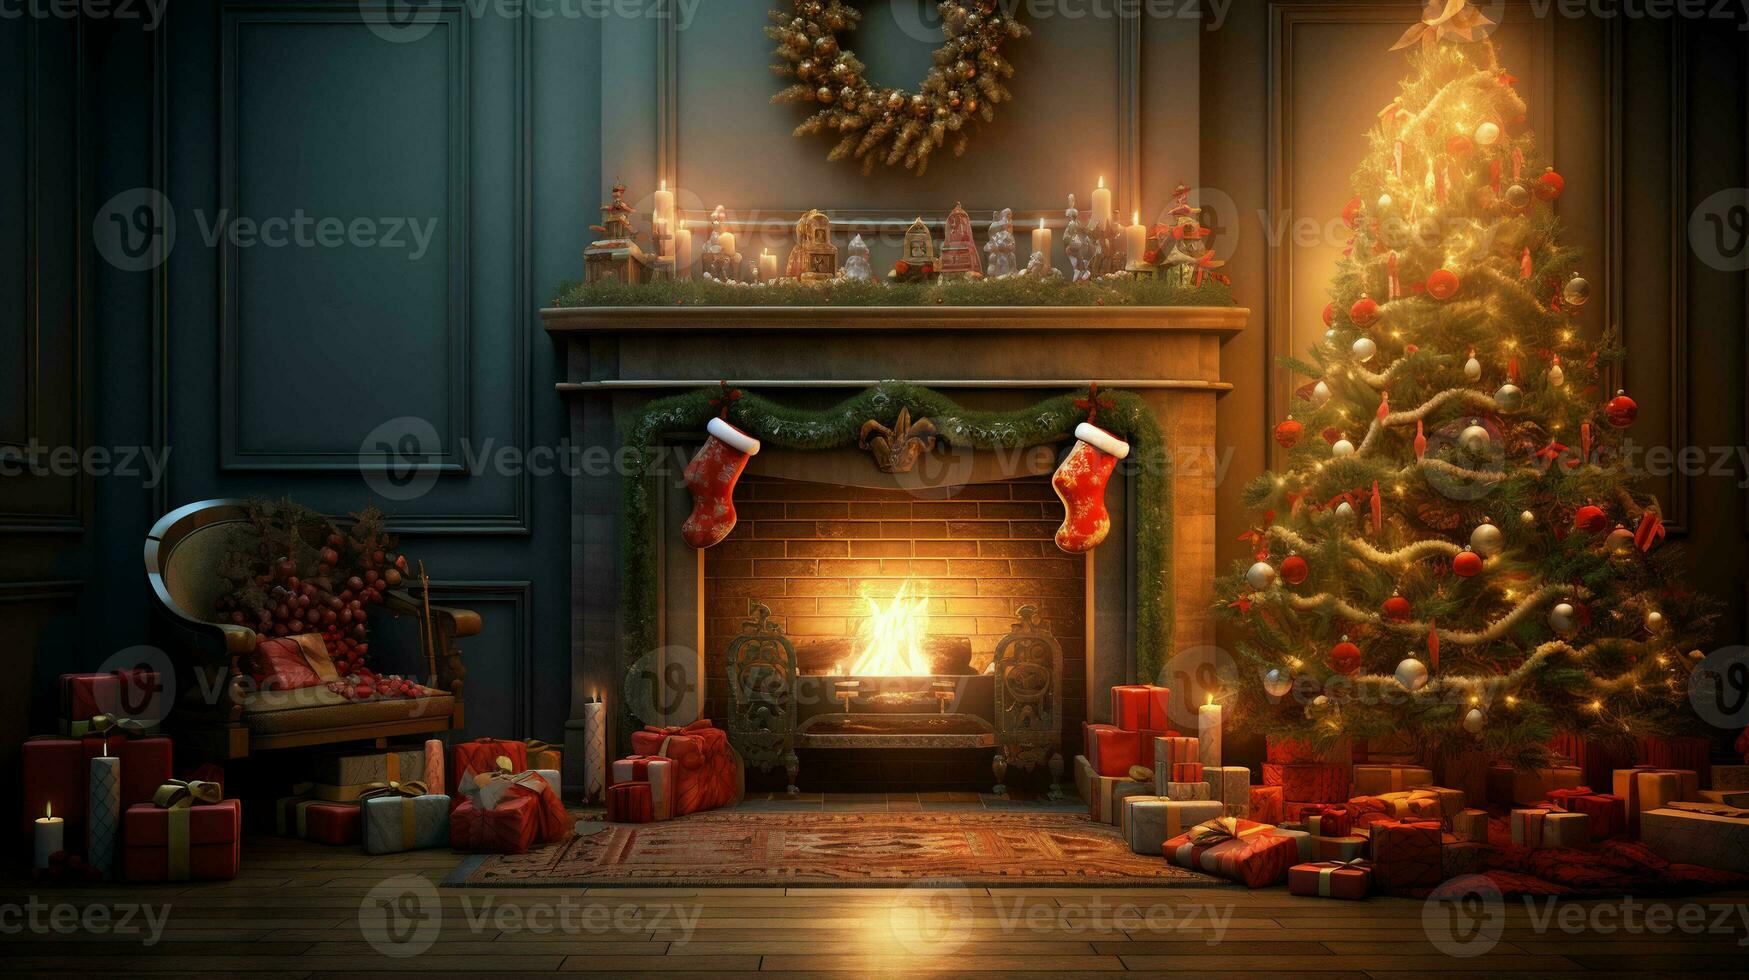 Cozy Christmas interior with a glowing tree, fireplace, and presents photo